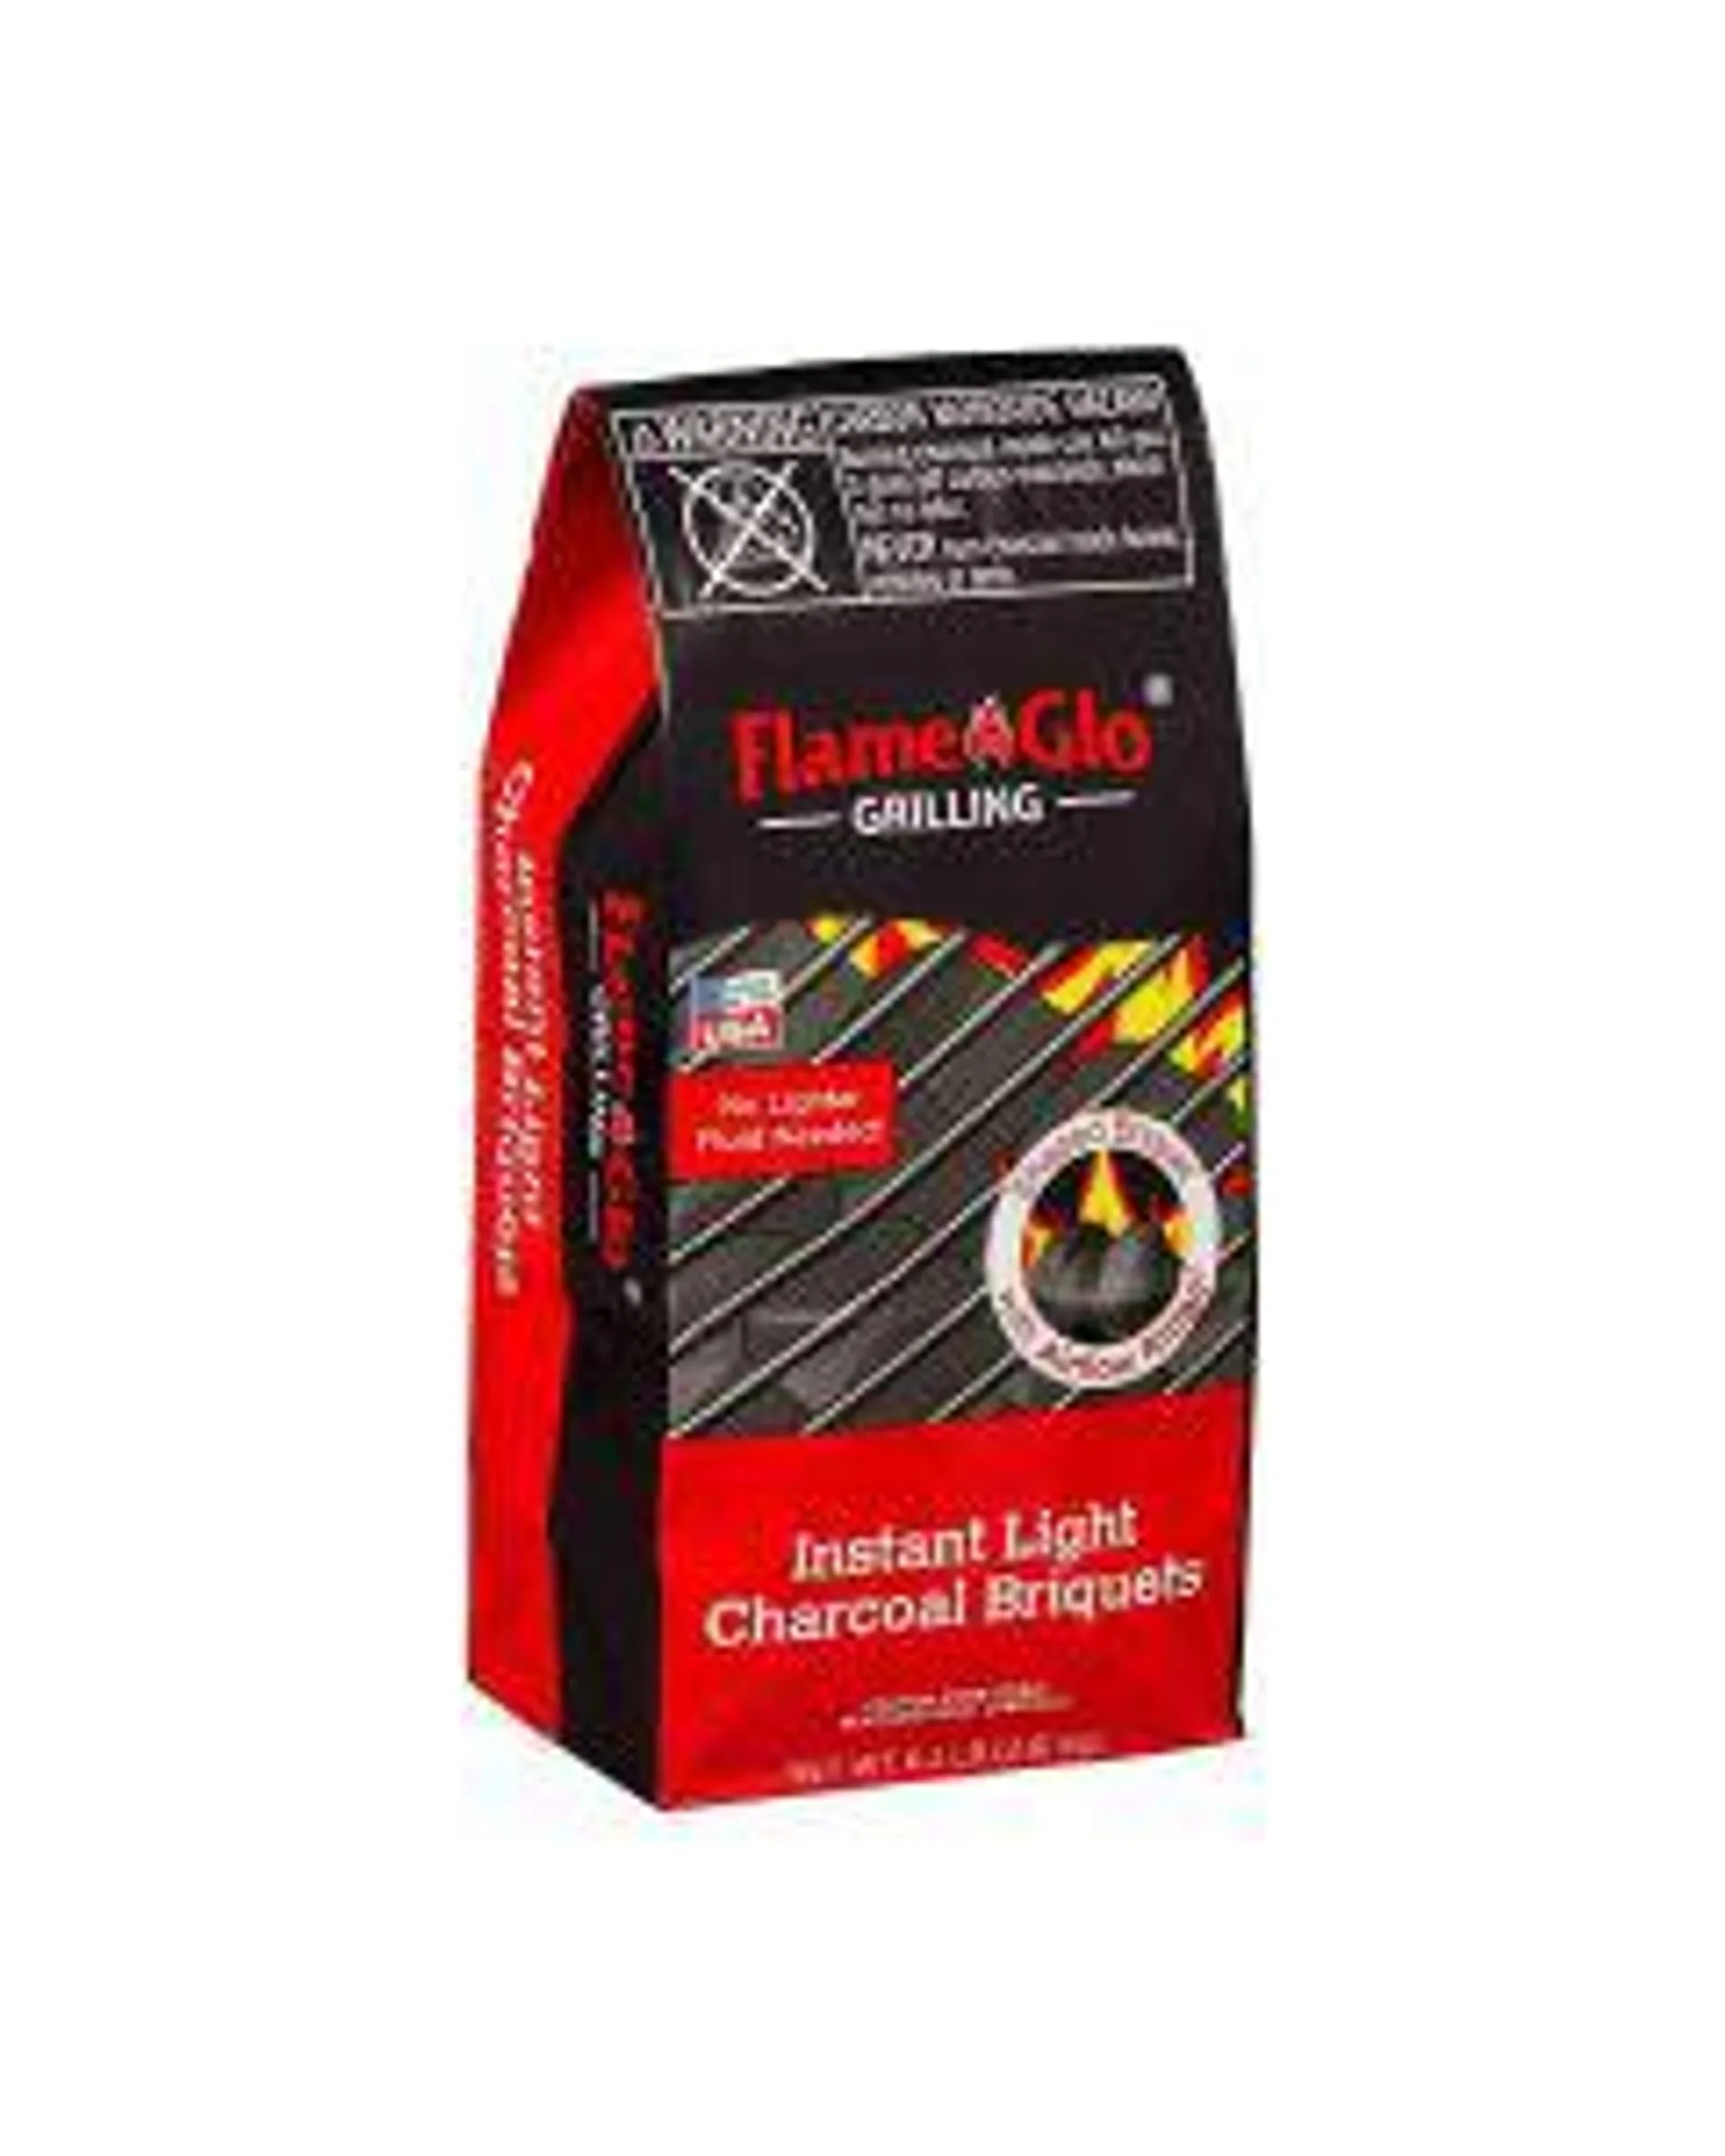 Flame Glo Grilling Instant Light Charcoal Briquets, 6.2 Lbs